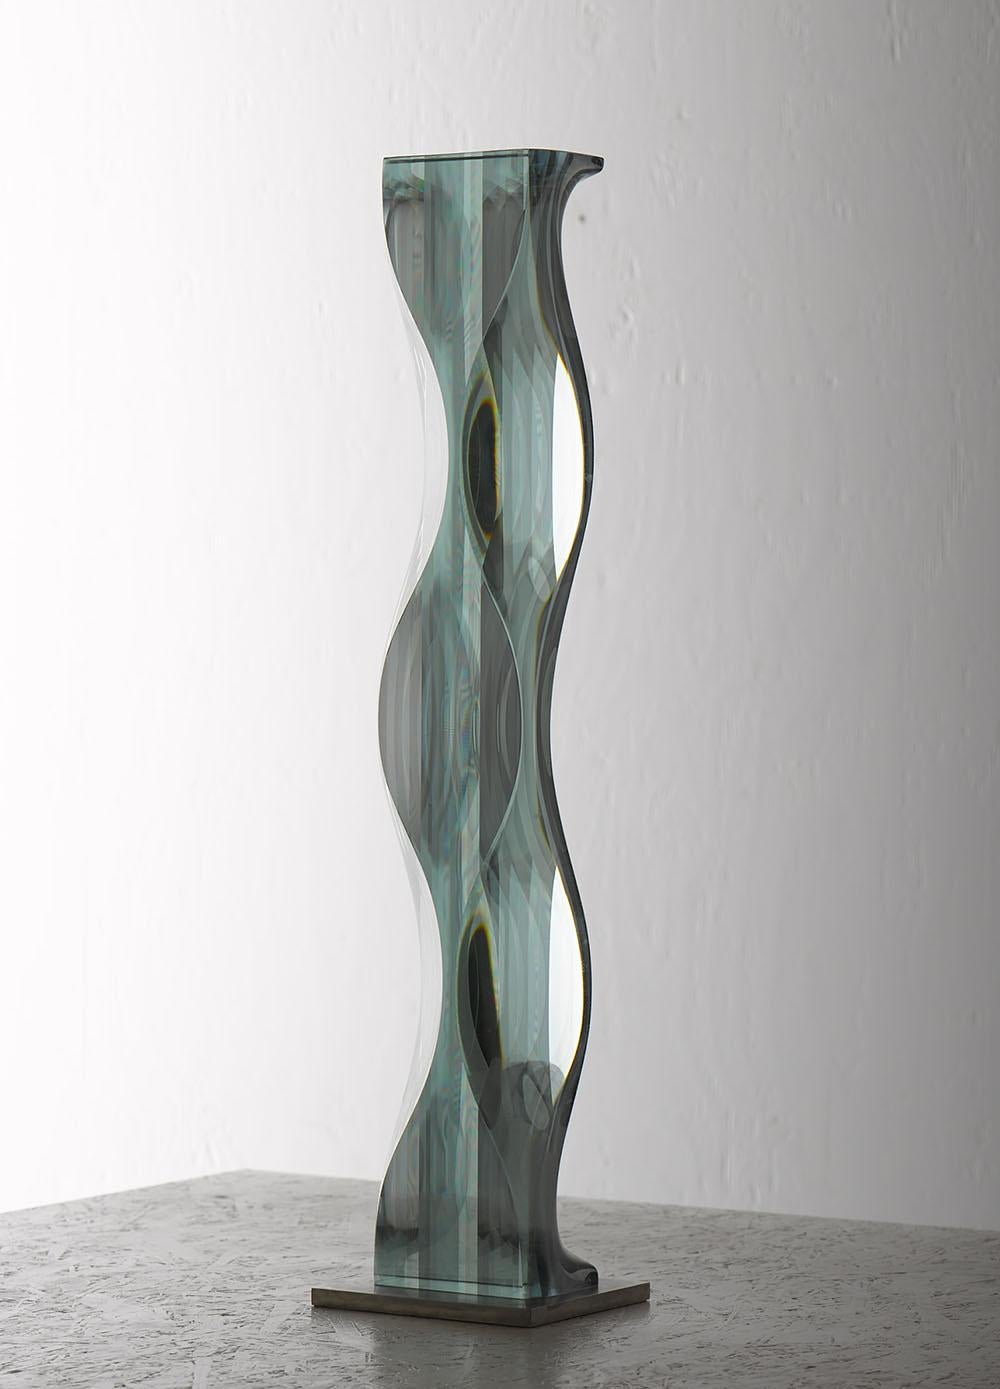 M.180603 is a glass sculpture by Japanese contemporary artist Toshio Iezumi, dimensions are 65 cm × 12 cm × 7 cm (25.6 × 4.7 × 2.8 in). 
The sculpture is signed and numbered, it is part of a limited edition of 5 editions and comes with a certificate